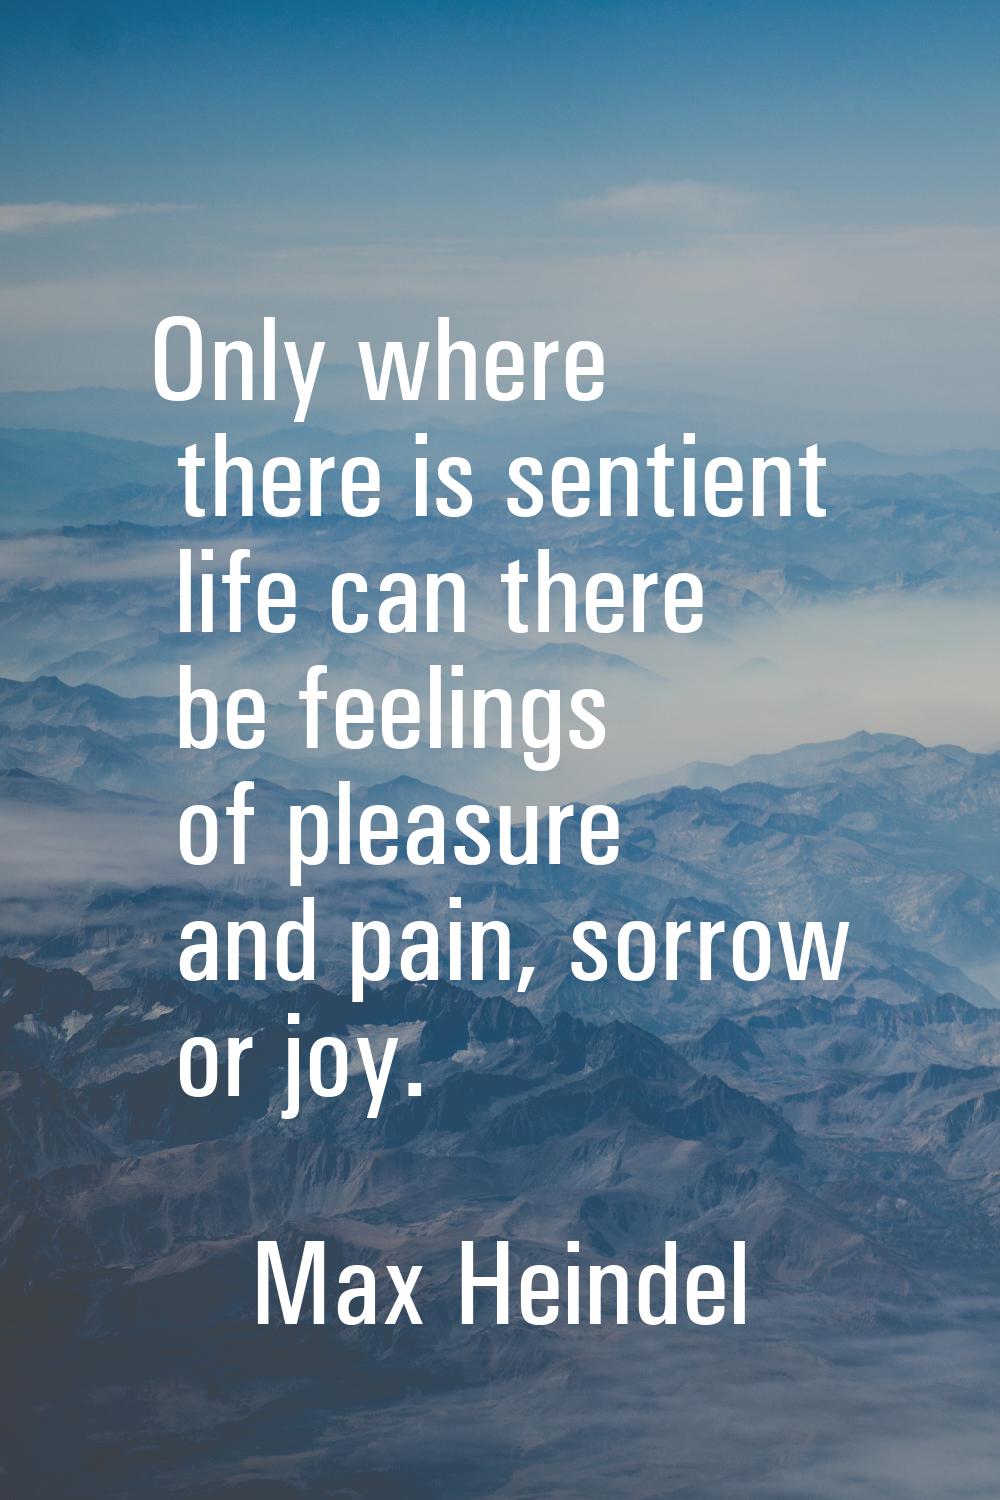 Only where there is sentient life can there be feelings of pleasure and pain, sorrow or joy.